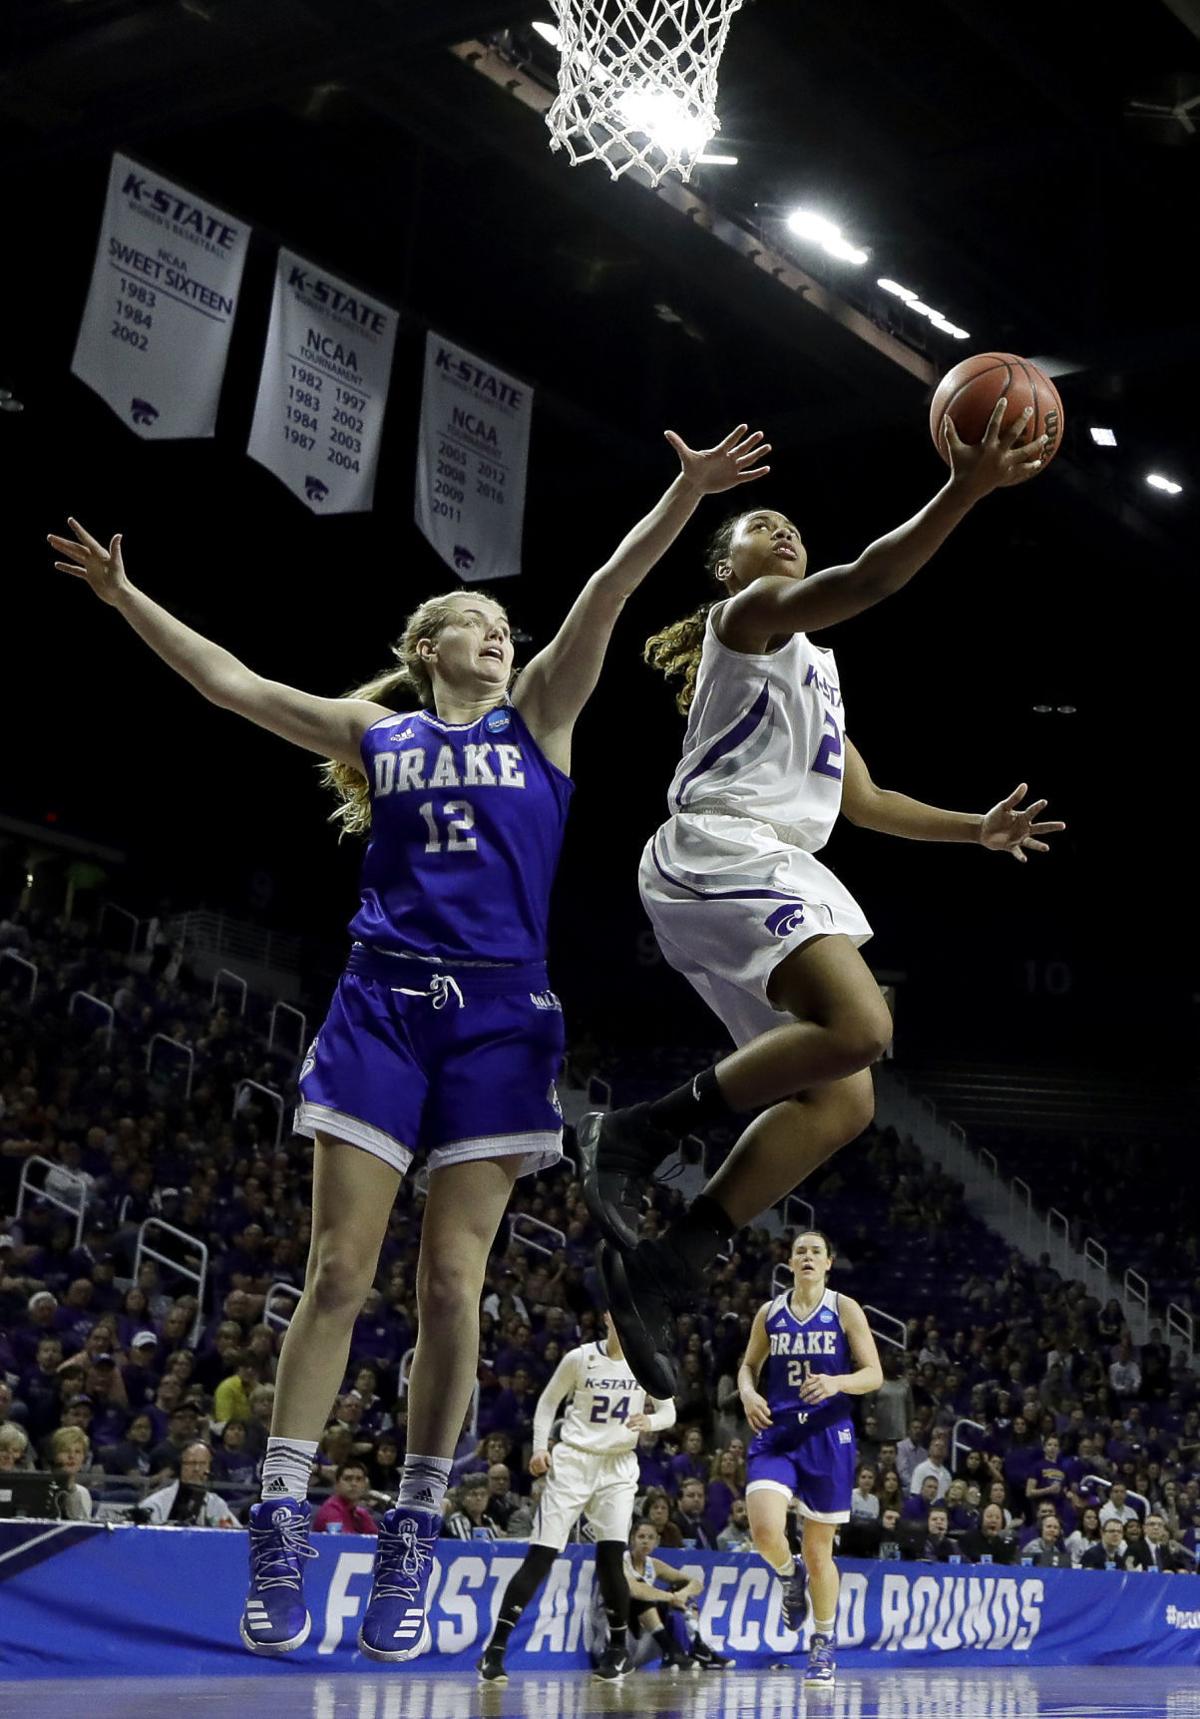 mvc women s basketball preview drake looks to start where it left off after record run salukimania thesouthern com